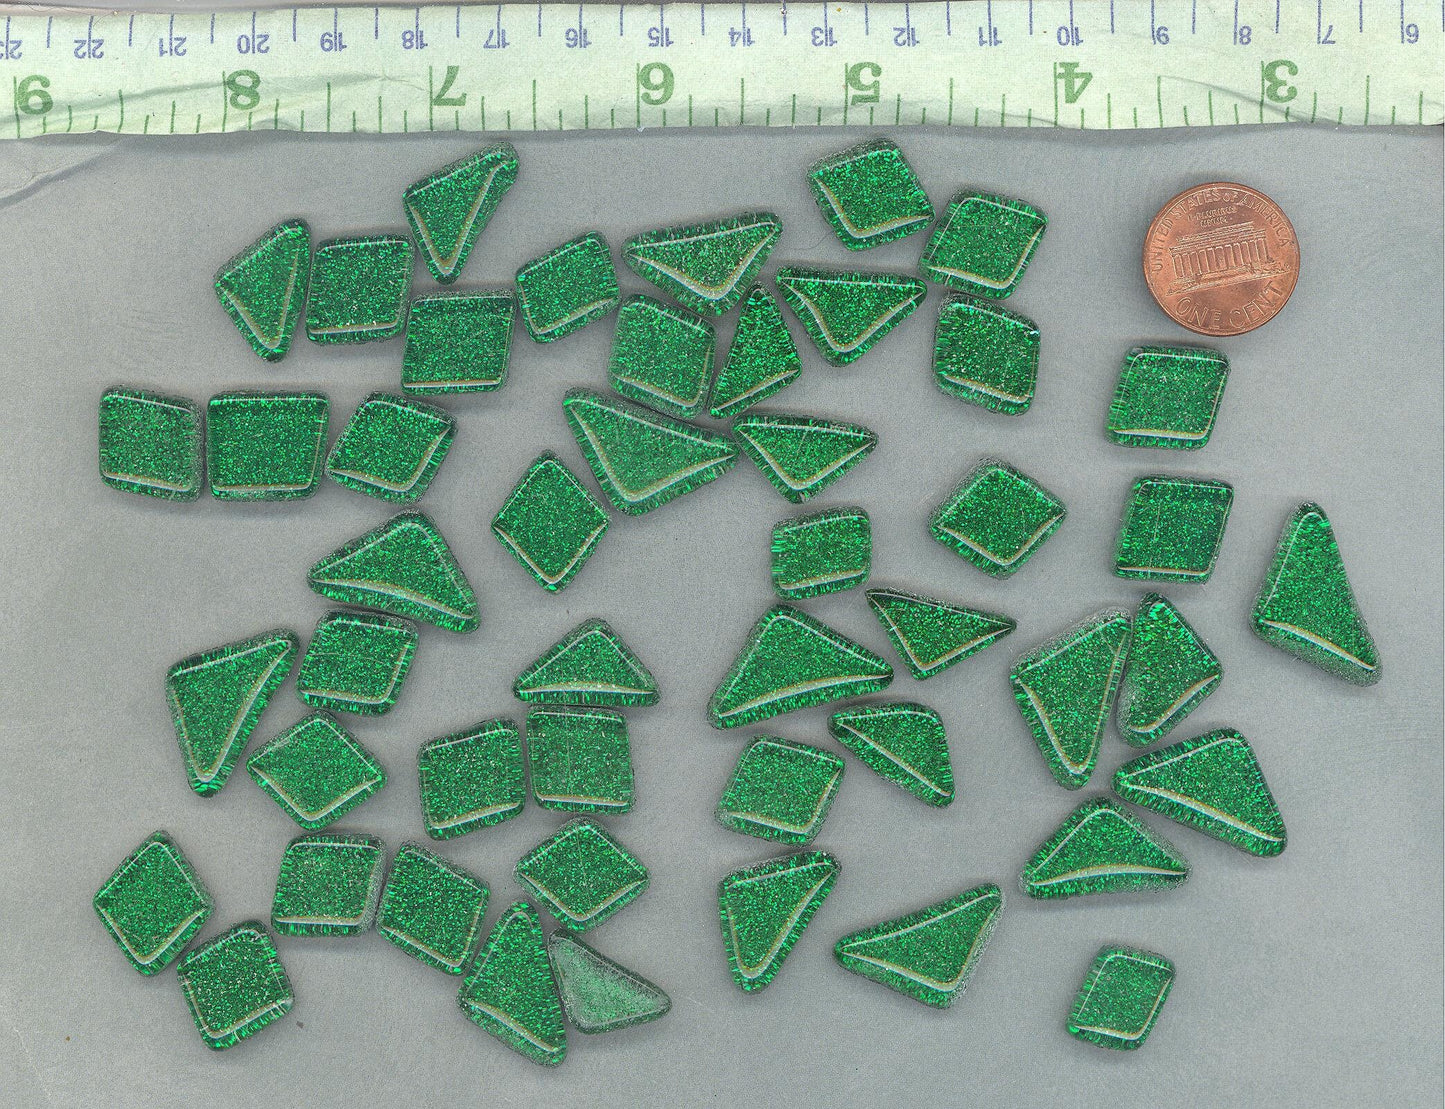 Green Glitter Puzzle Tiles - 100 grams in Assorted Shapes Glass Mosaic Tiles in Deep Forest Green